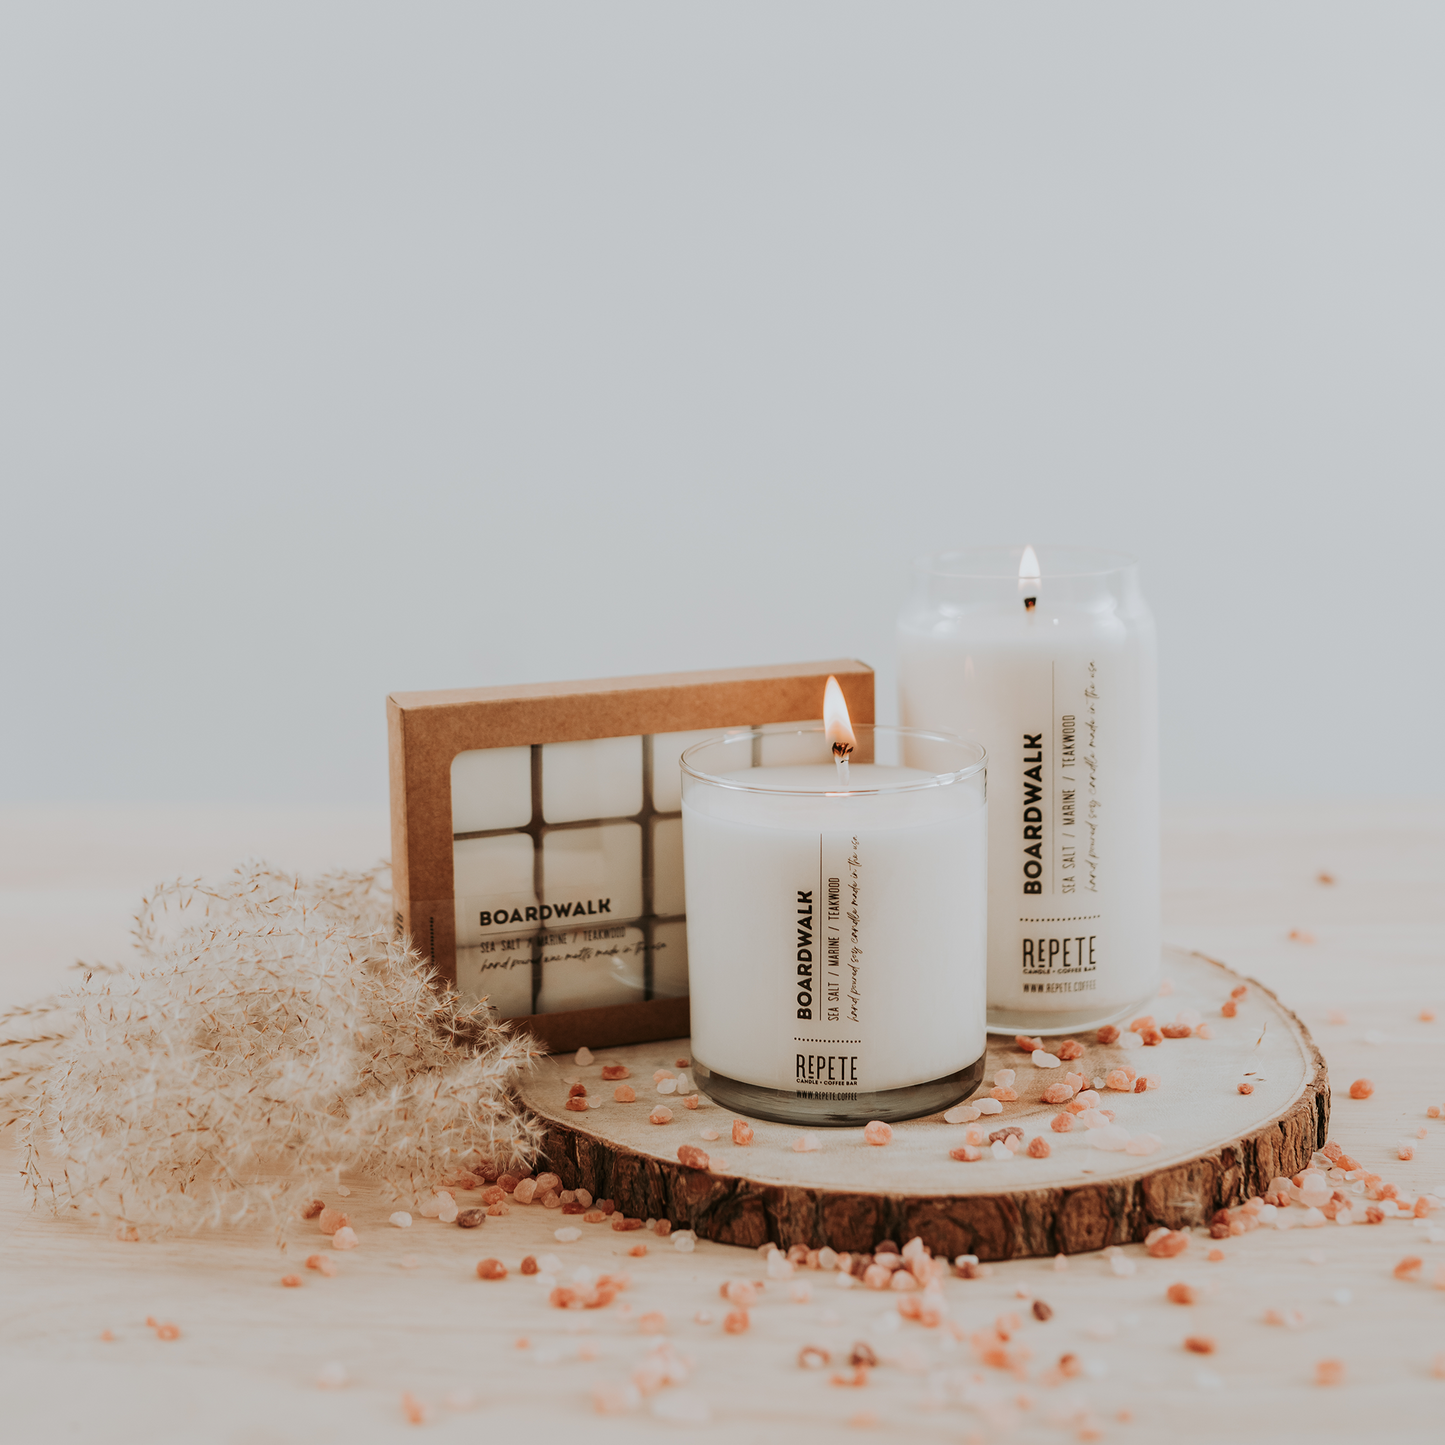 Boardwalk scented products from Repete Candle and Coffee Bar